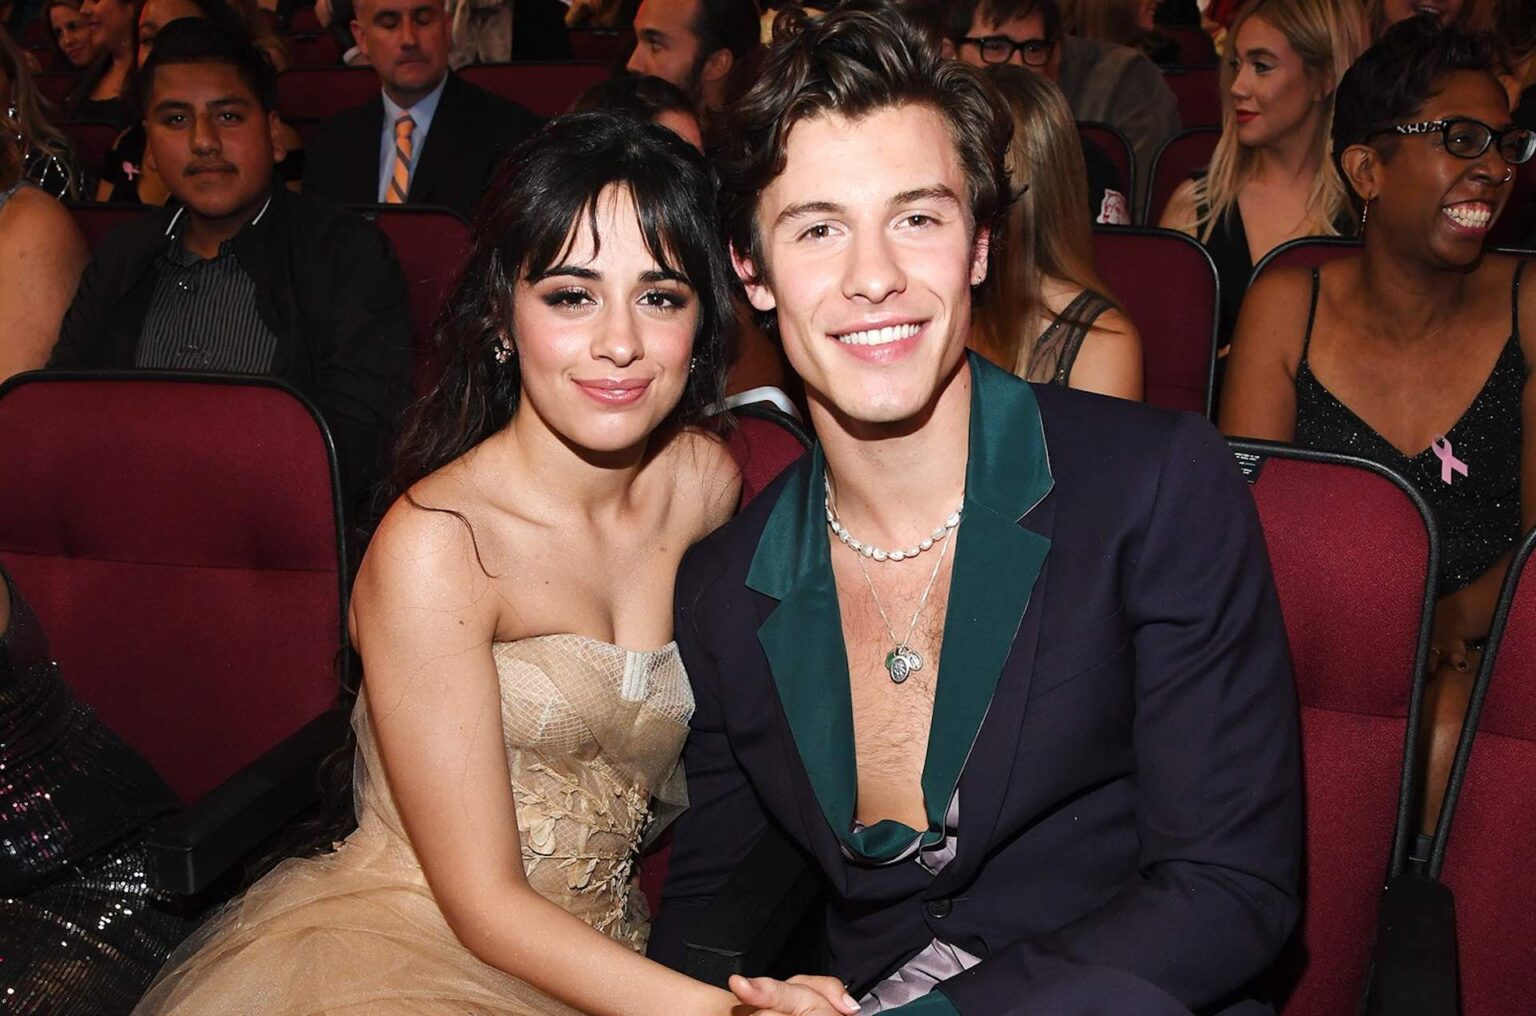 Things between Shawn Mendes & Camila Cabello have been considered weird from the beginning. Let's take a look at who Mendes has been dating.